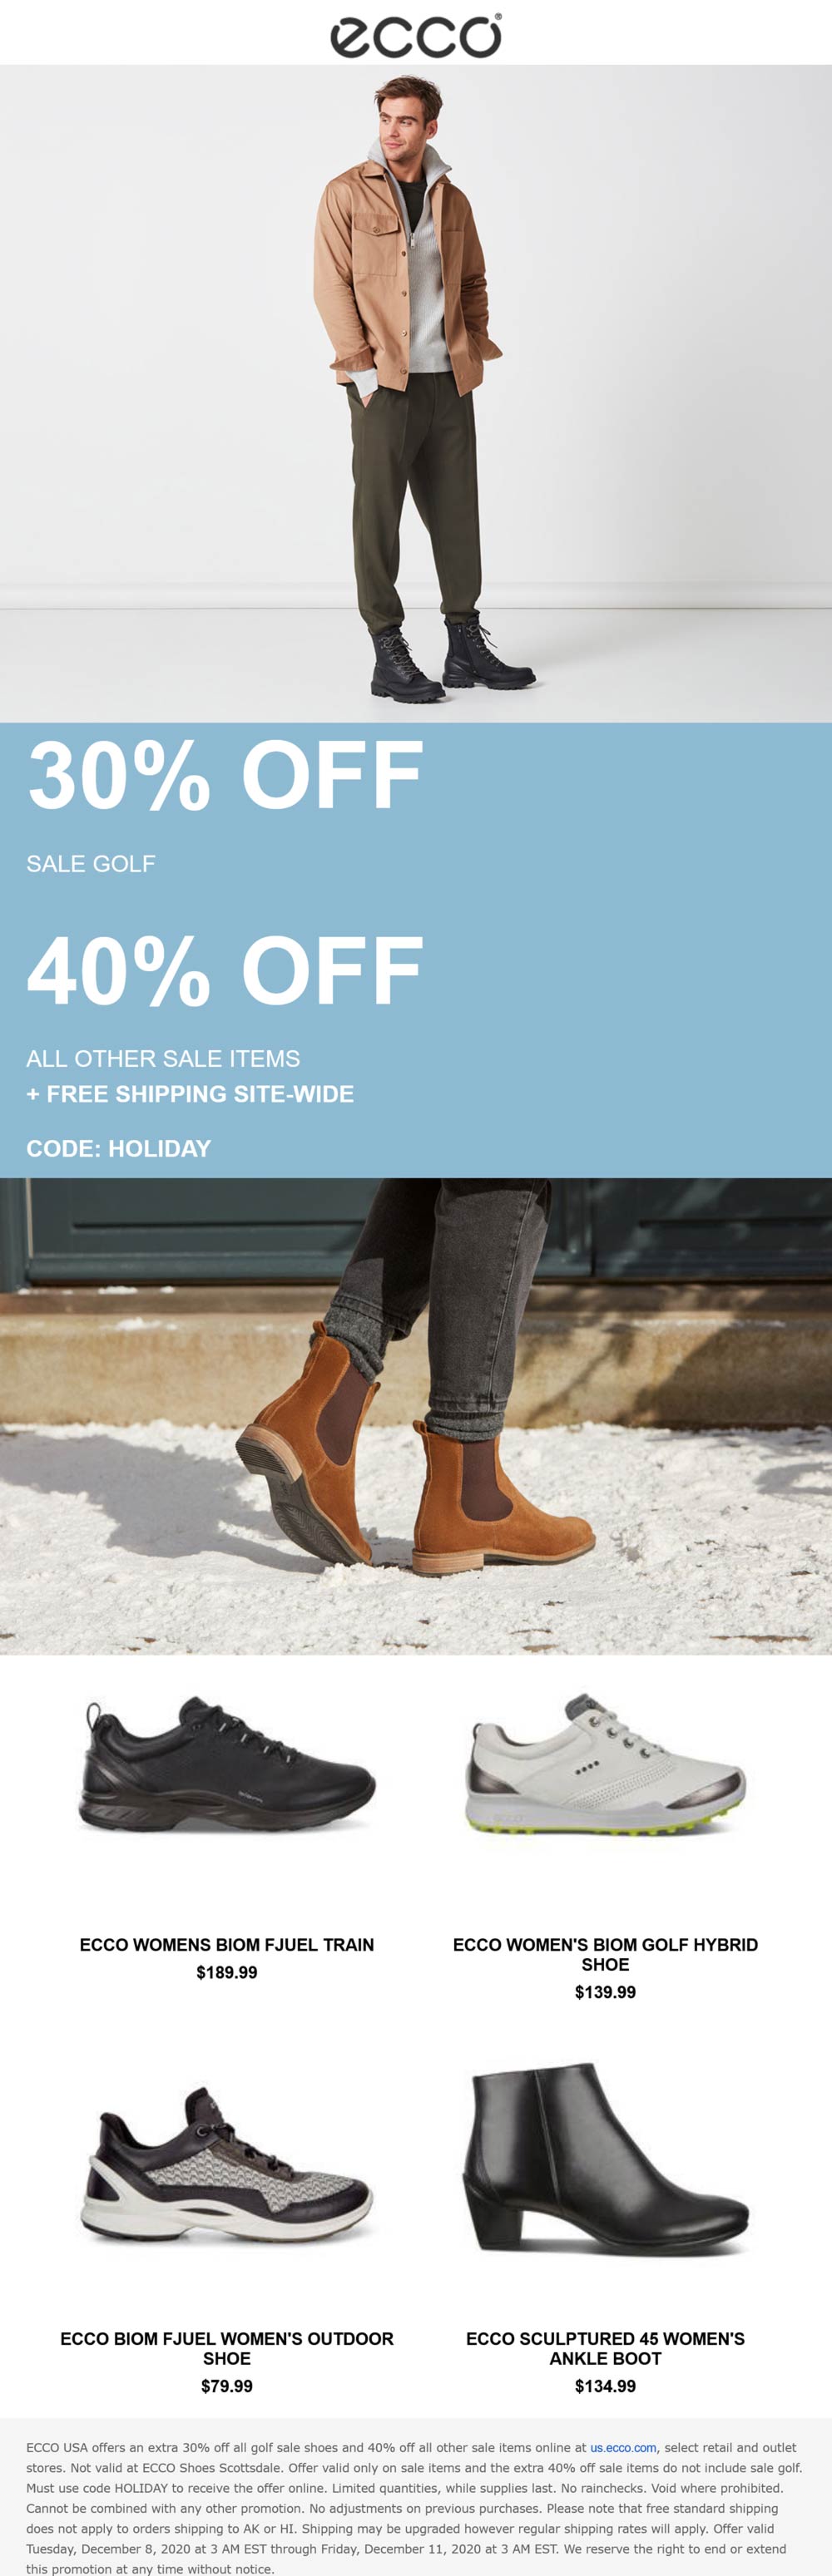 3040 off at ECCO via promo code HOLIDAY ecco The Coupons App®